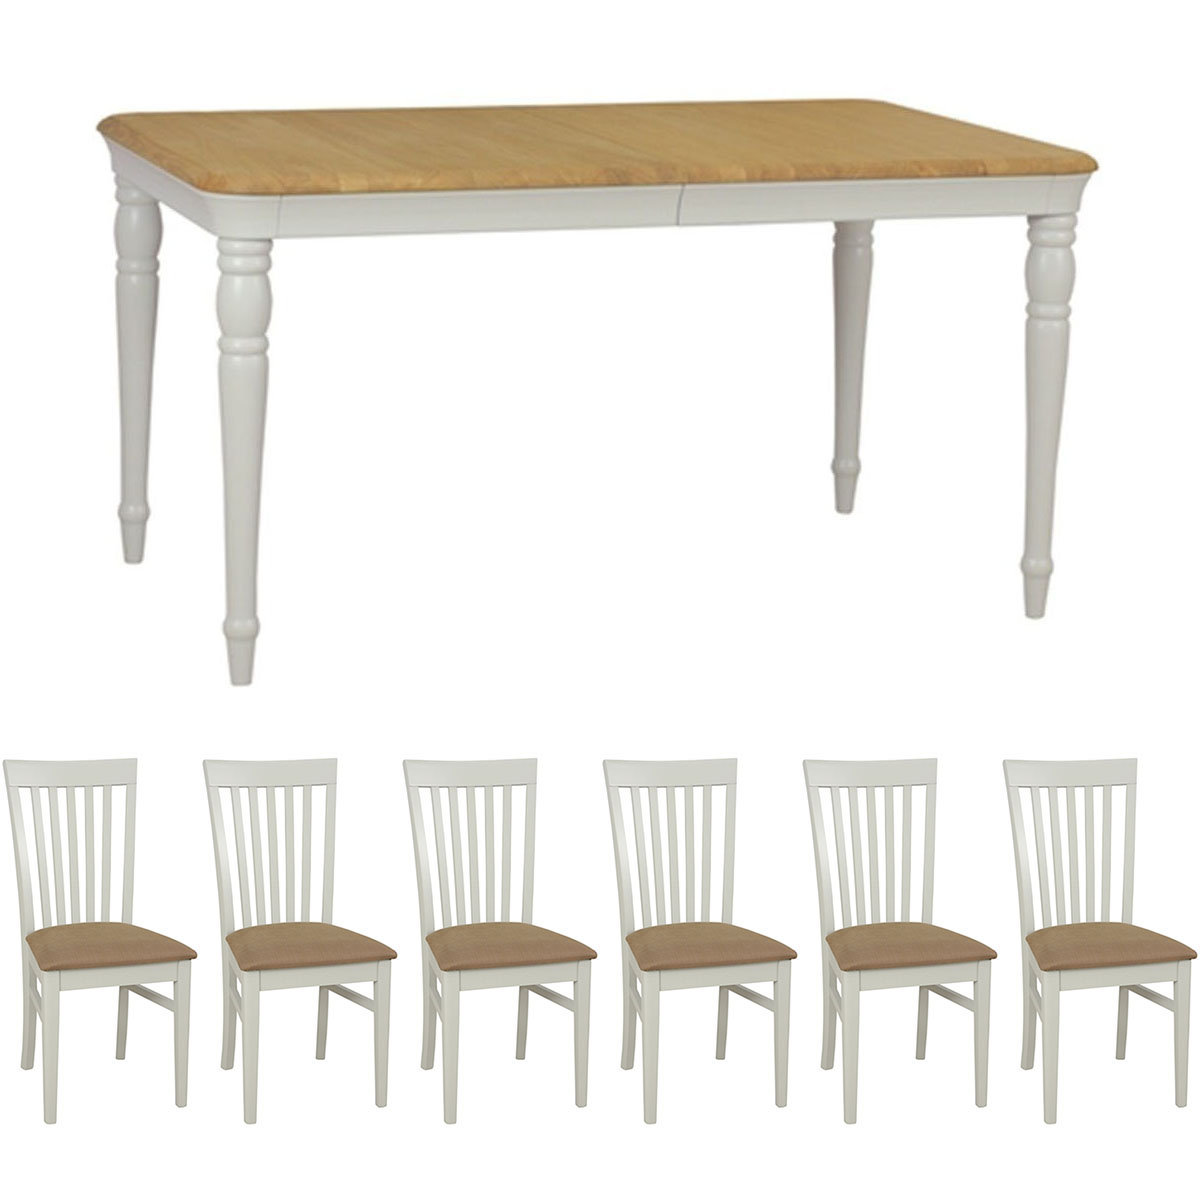 Stag Cromwell Extending Dining Table & 6 Elizabeth Chairs